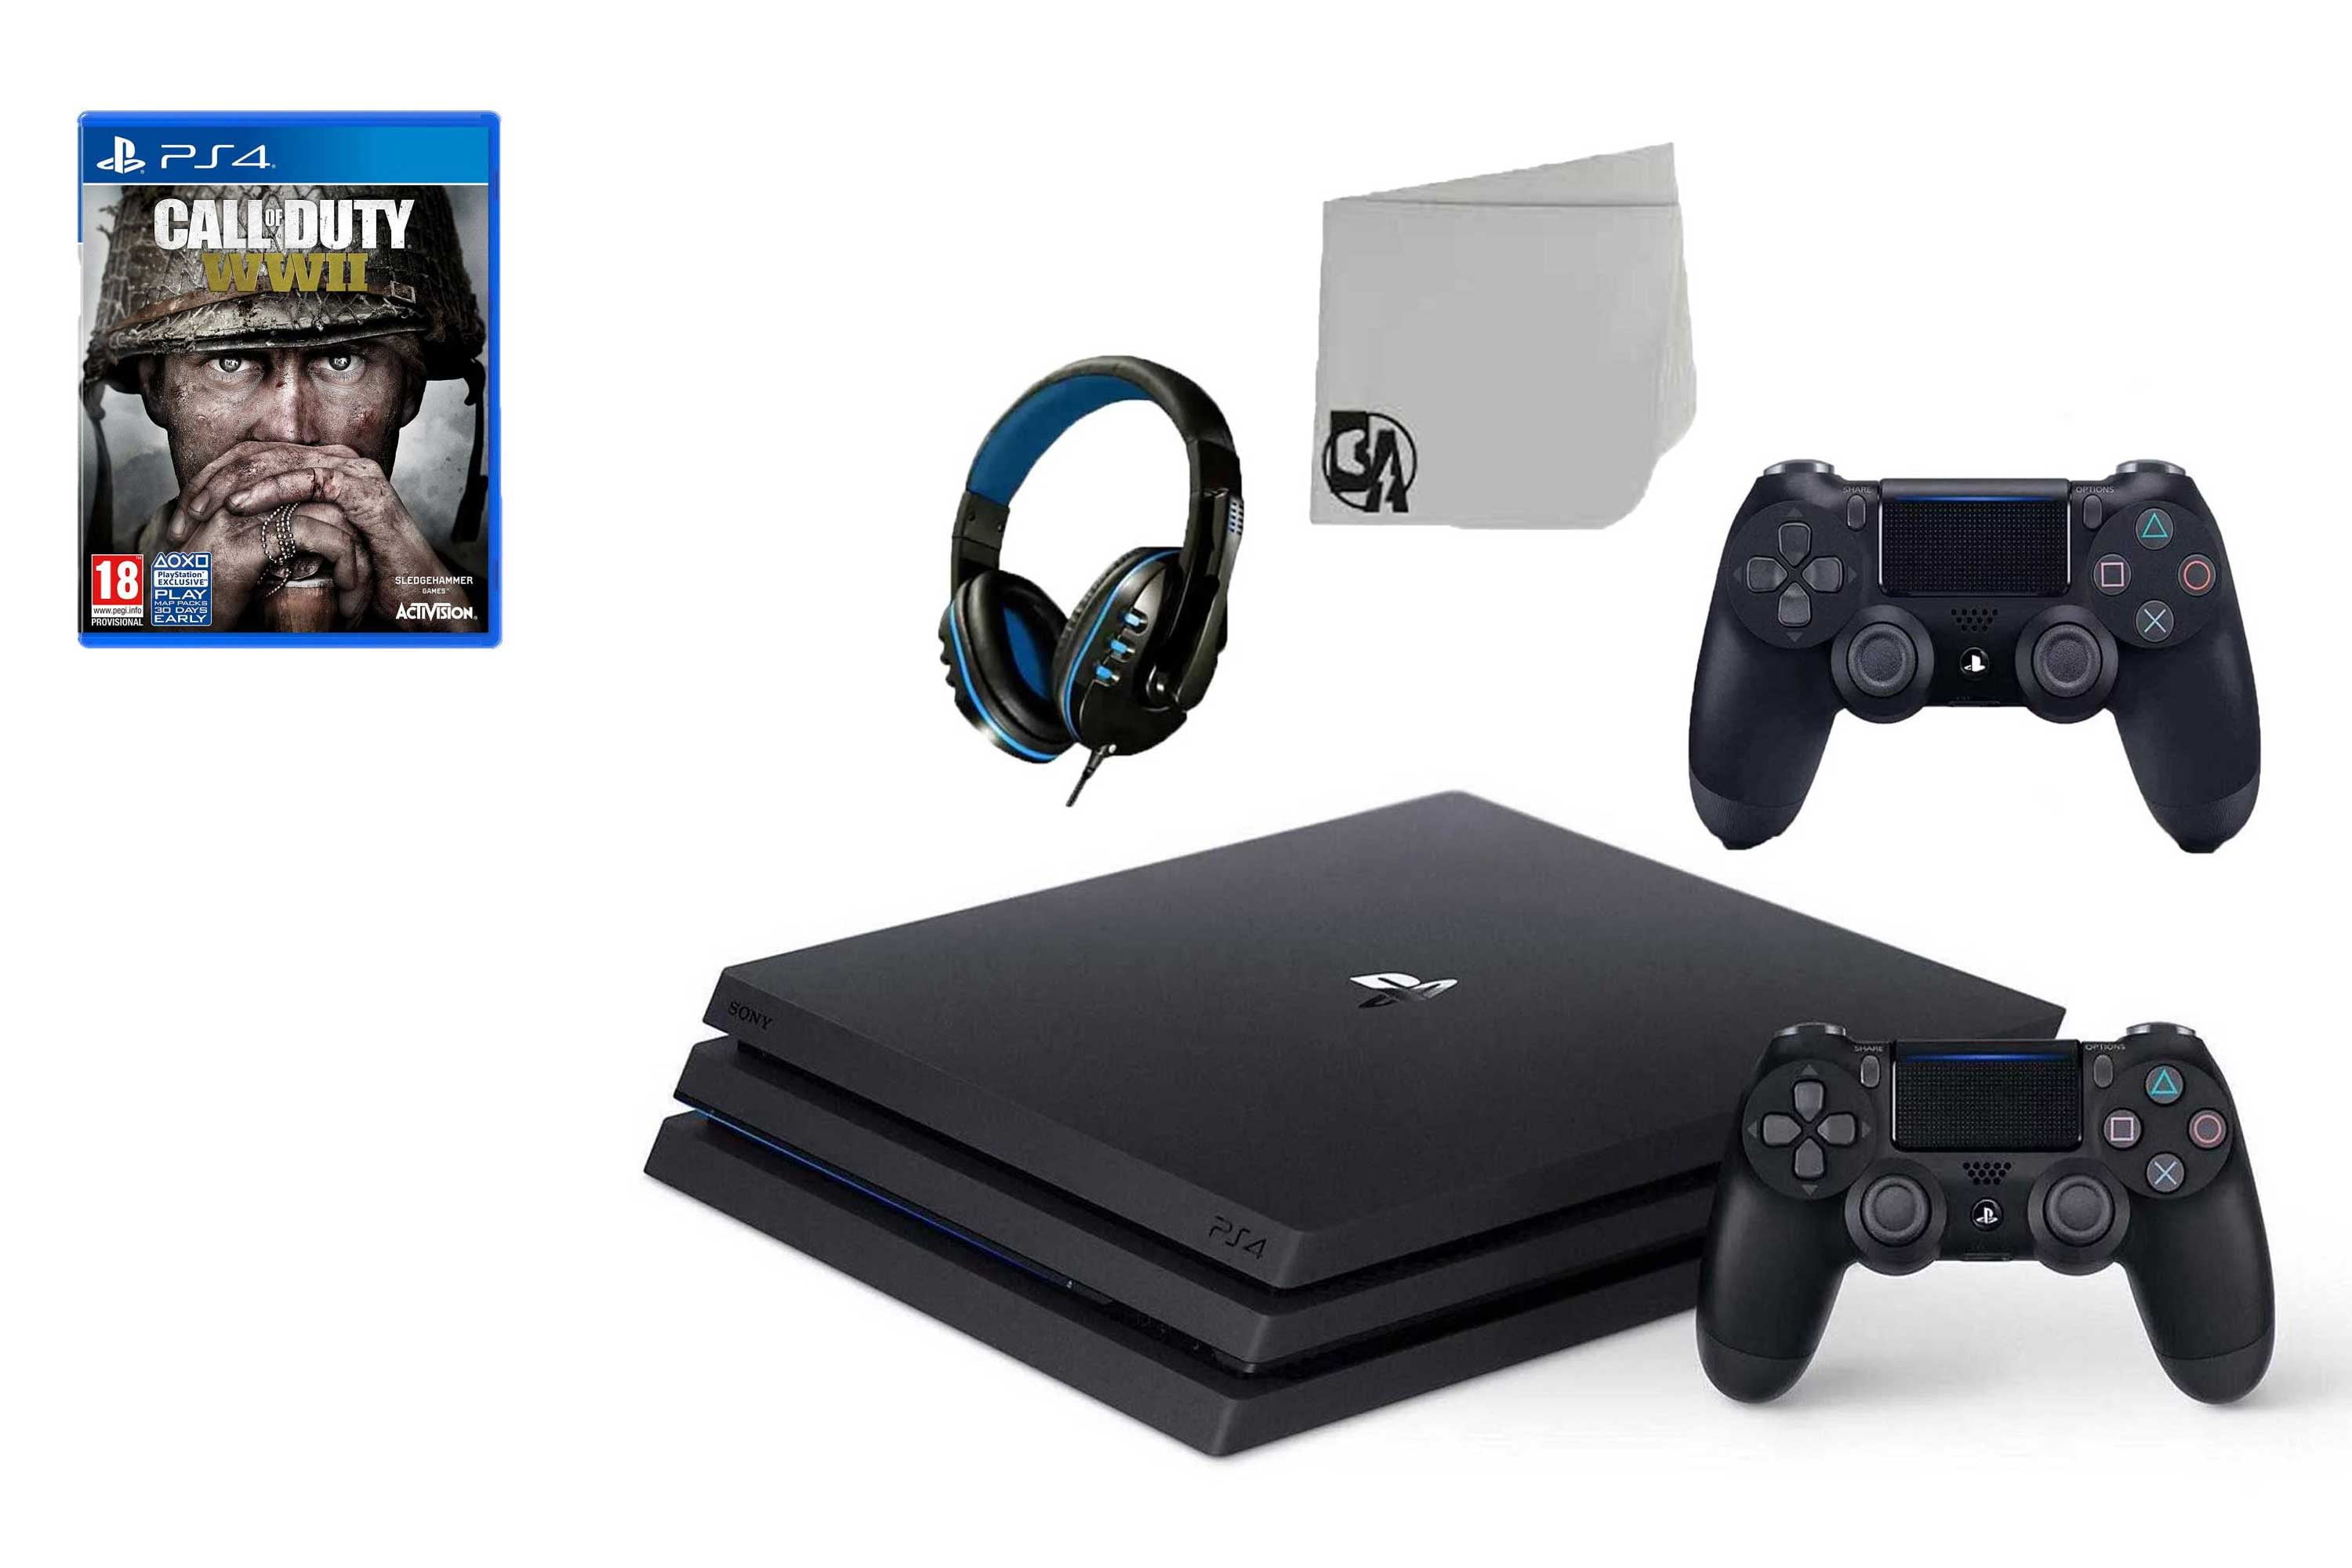 Analytiker kabine Fedt Sony PlayStation 4 Pro 1TB Gaming Console Black 2 Controller Included with  FIFA-20 BOLT AXTION Bundle Like New - Walmart.com